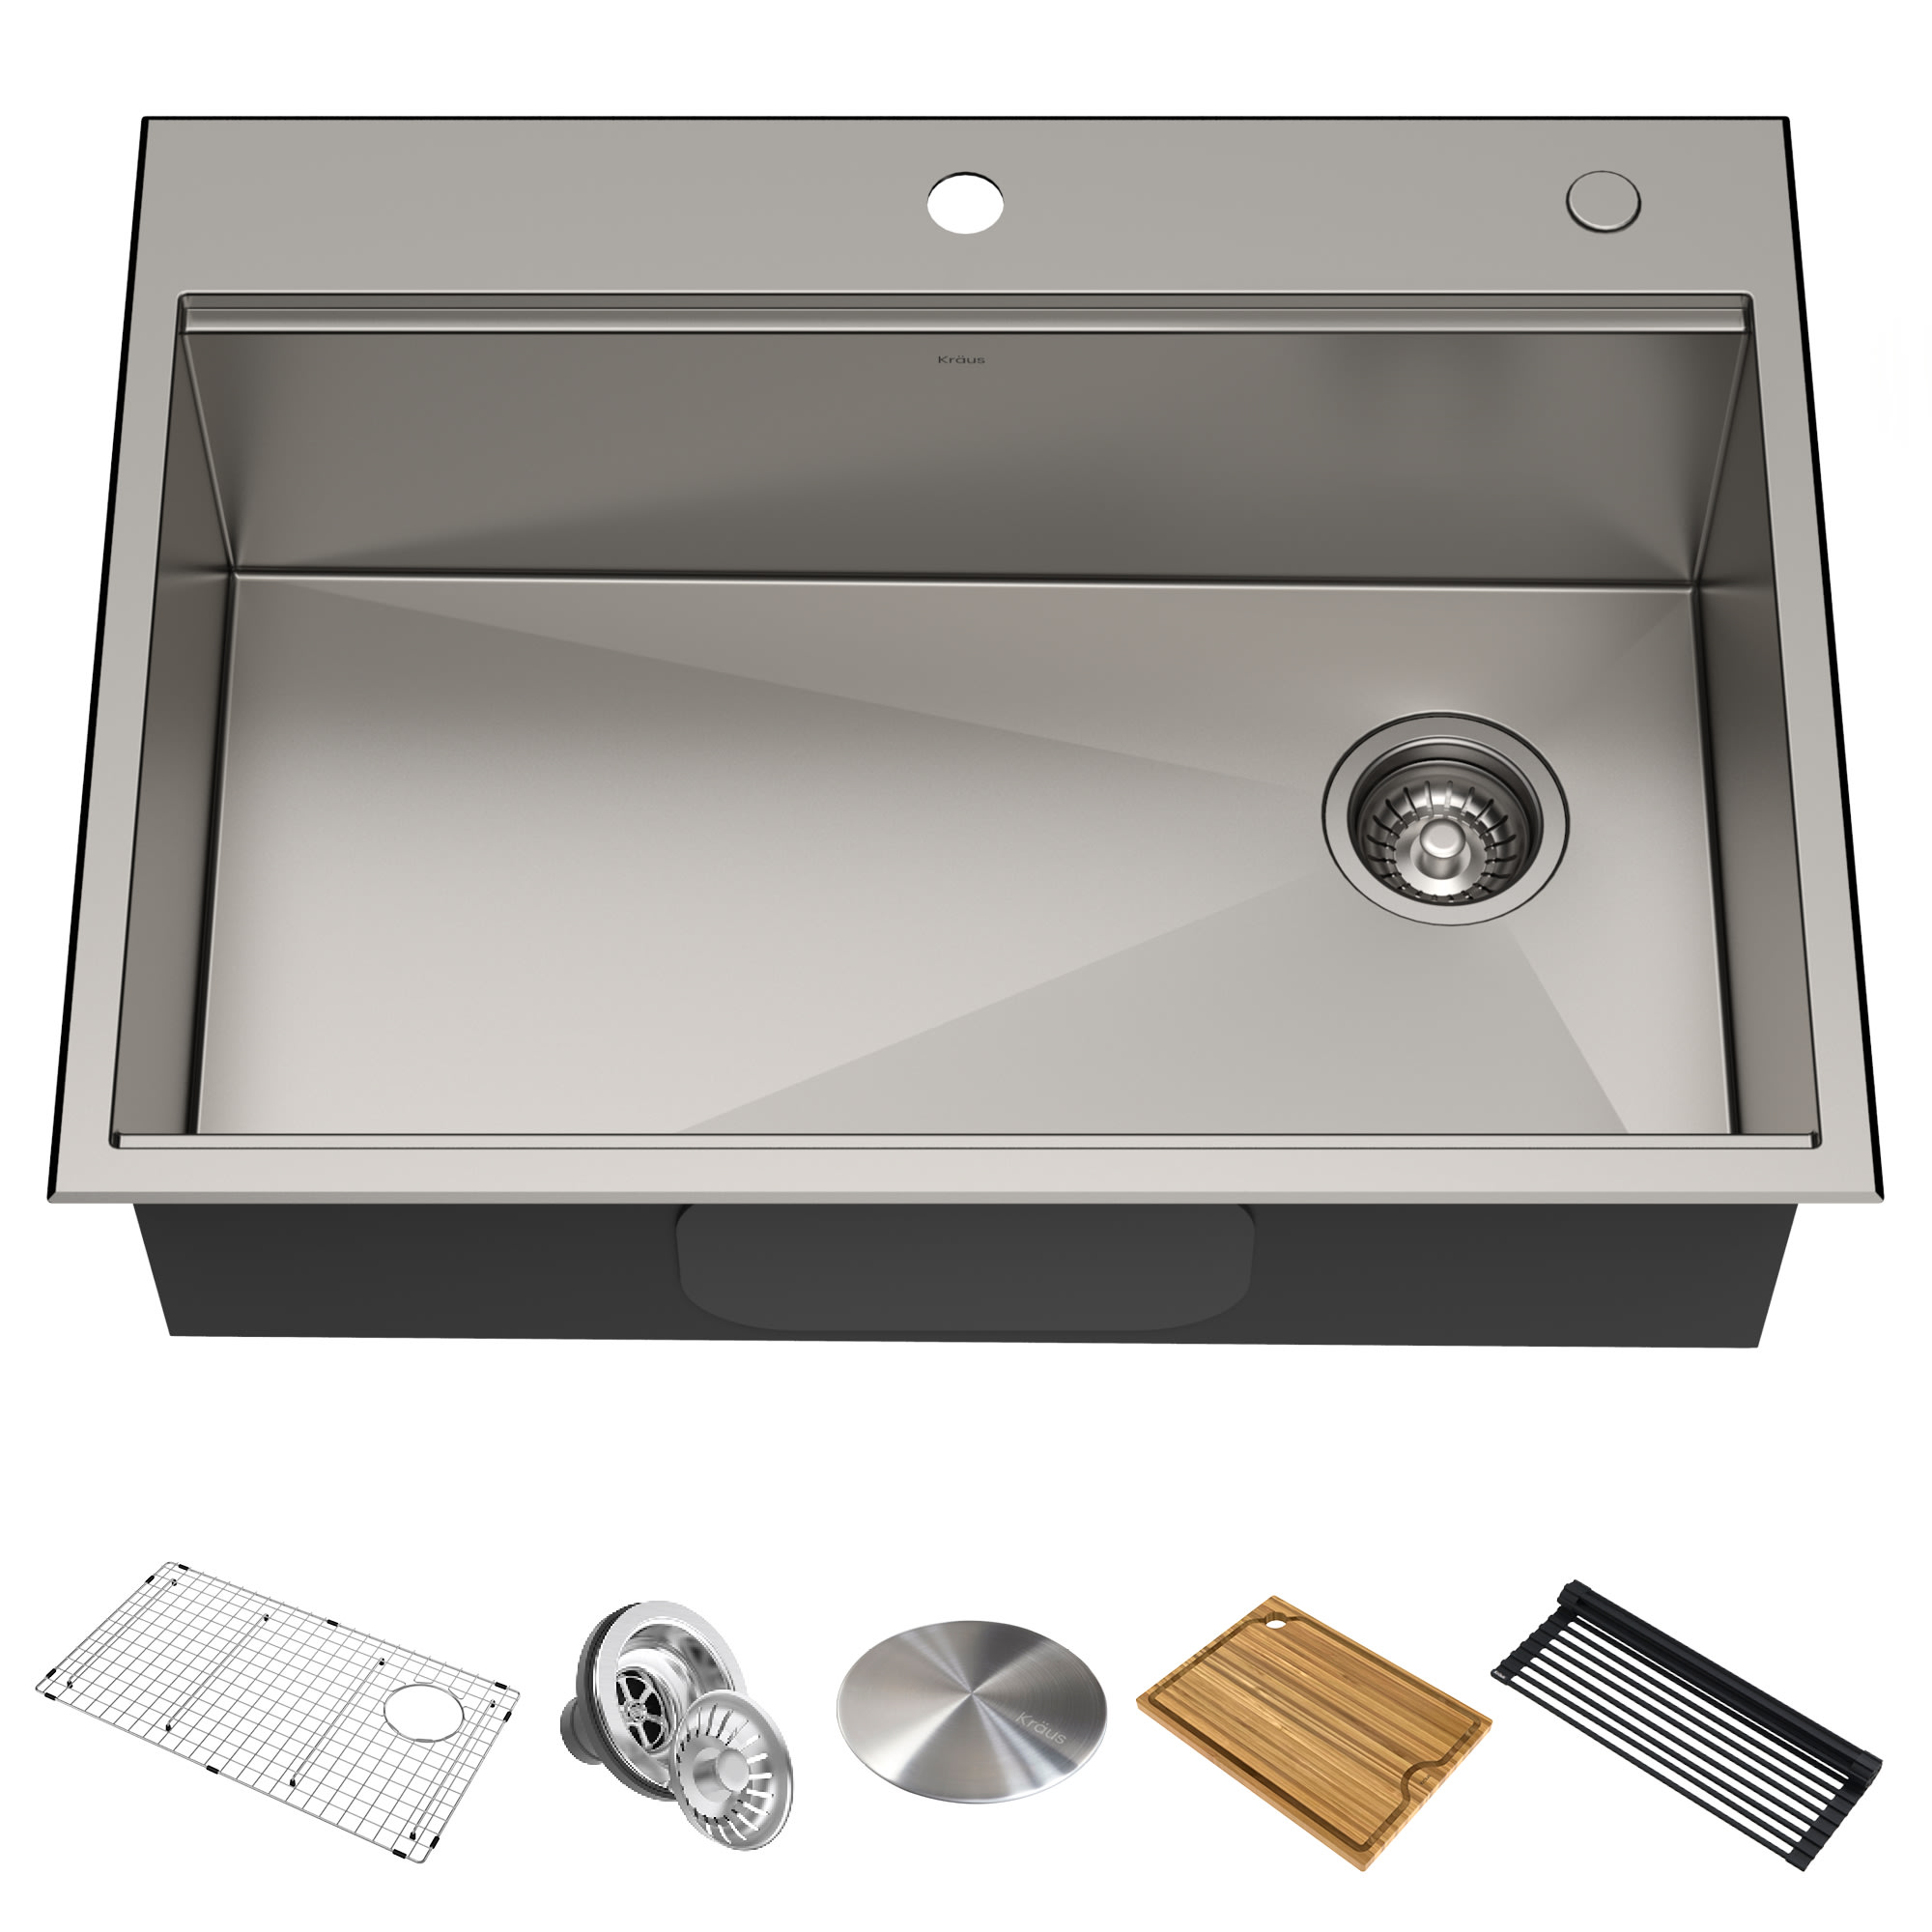 GROHE Kitchen Sink Accessories: Transforming the sink into a prep station